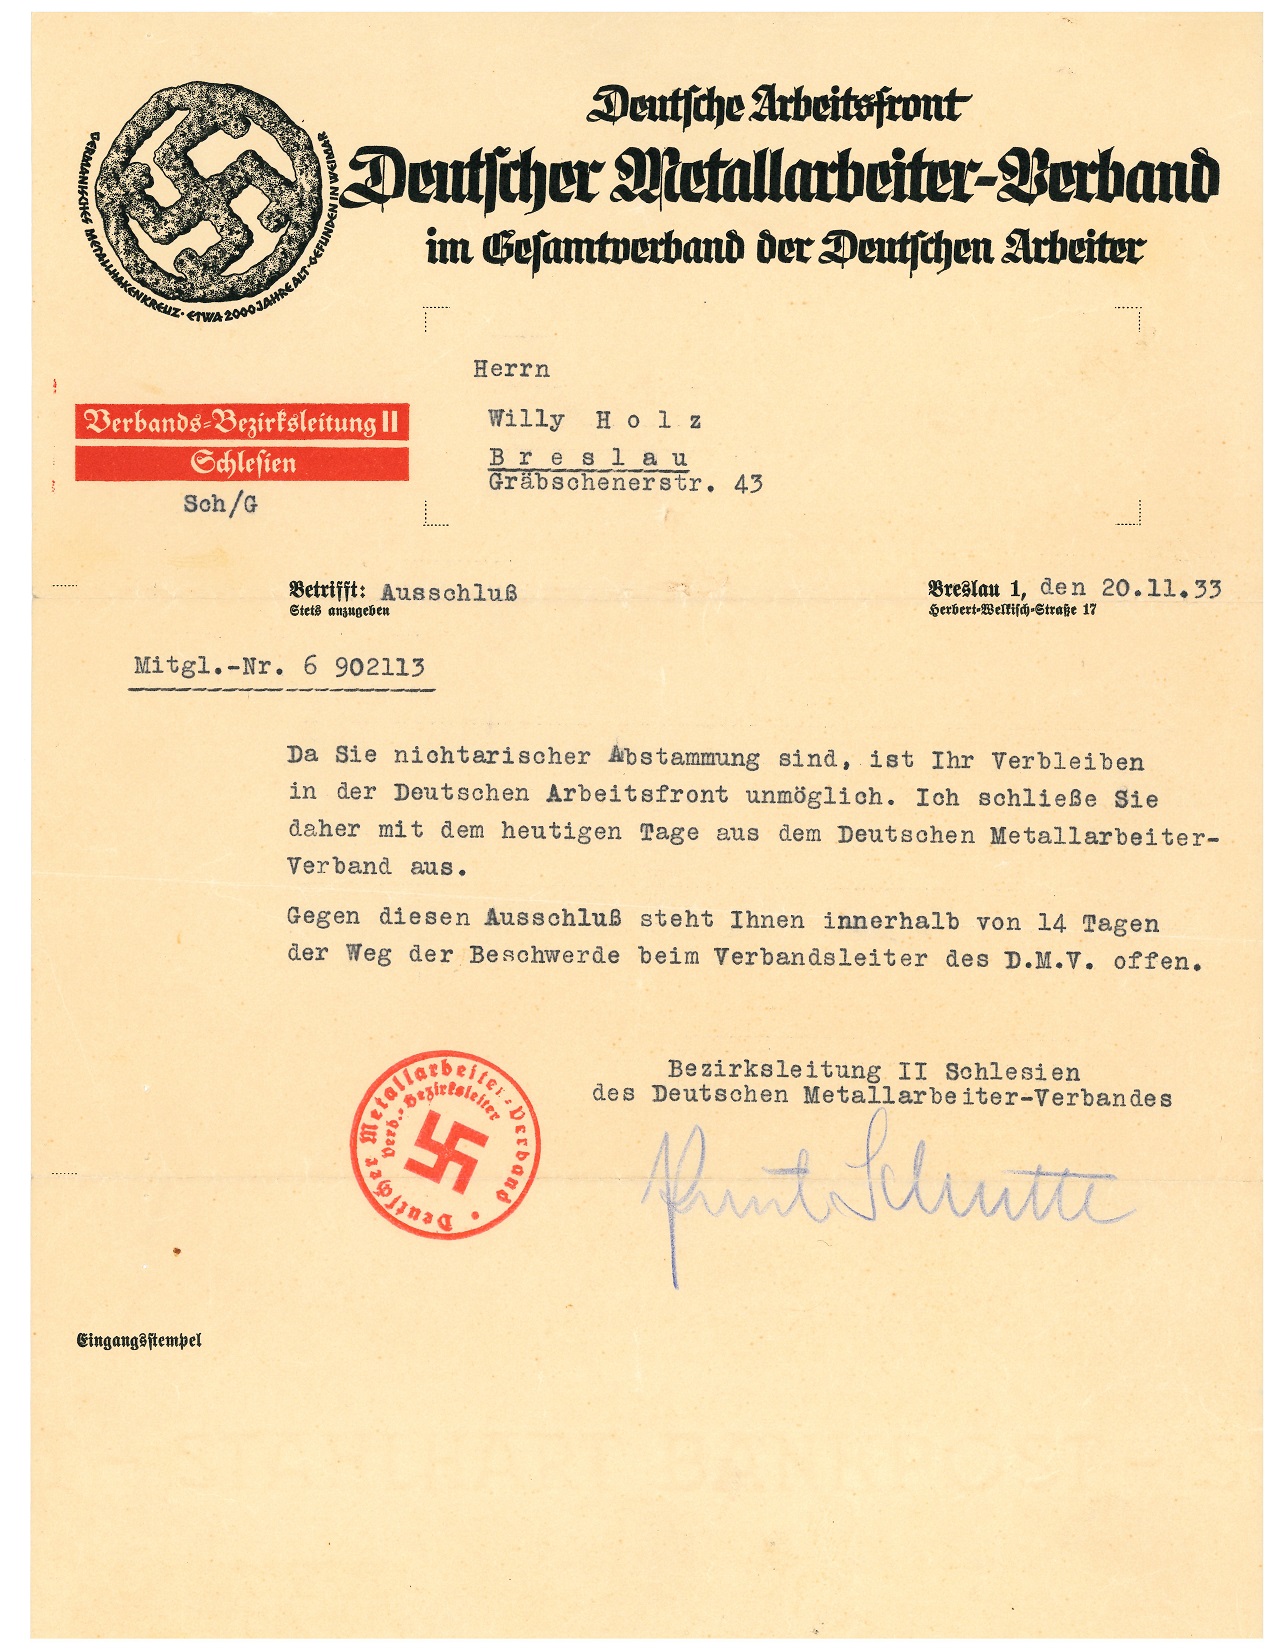 Letter to Willy Holz from German Metal Workers' Union